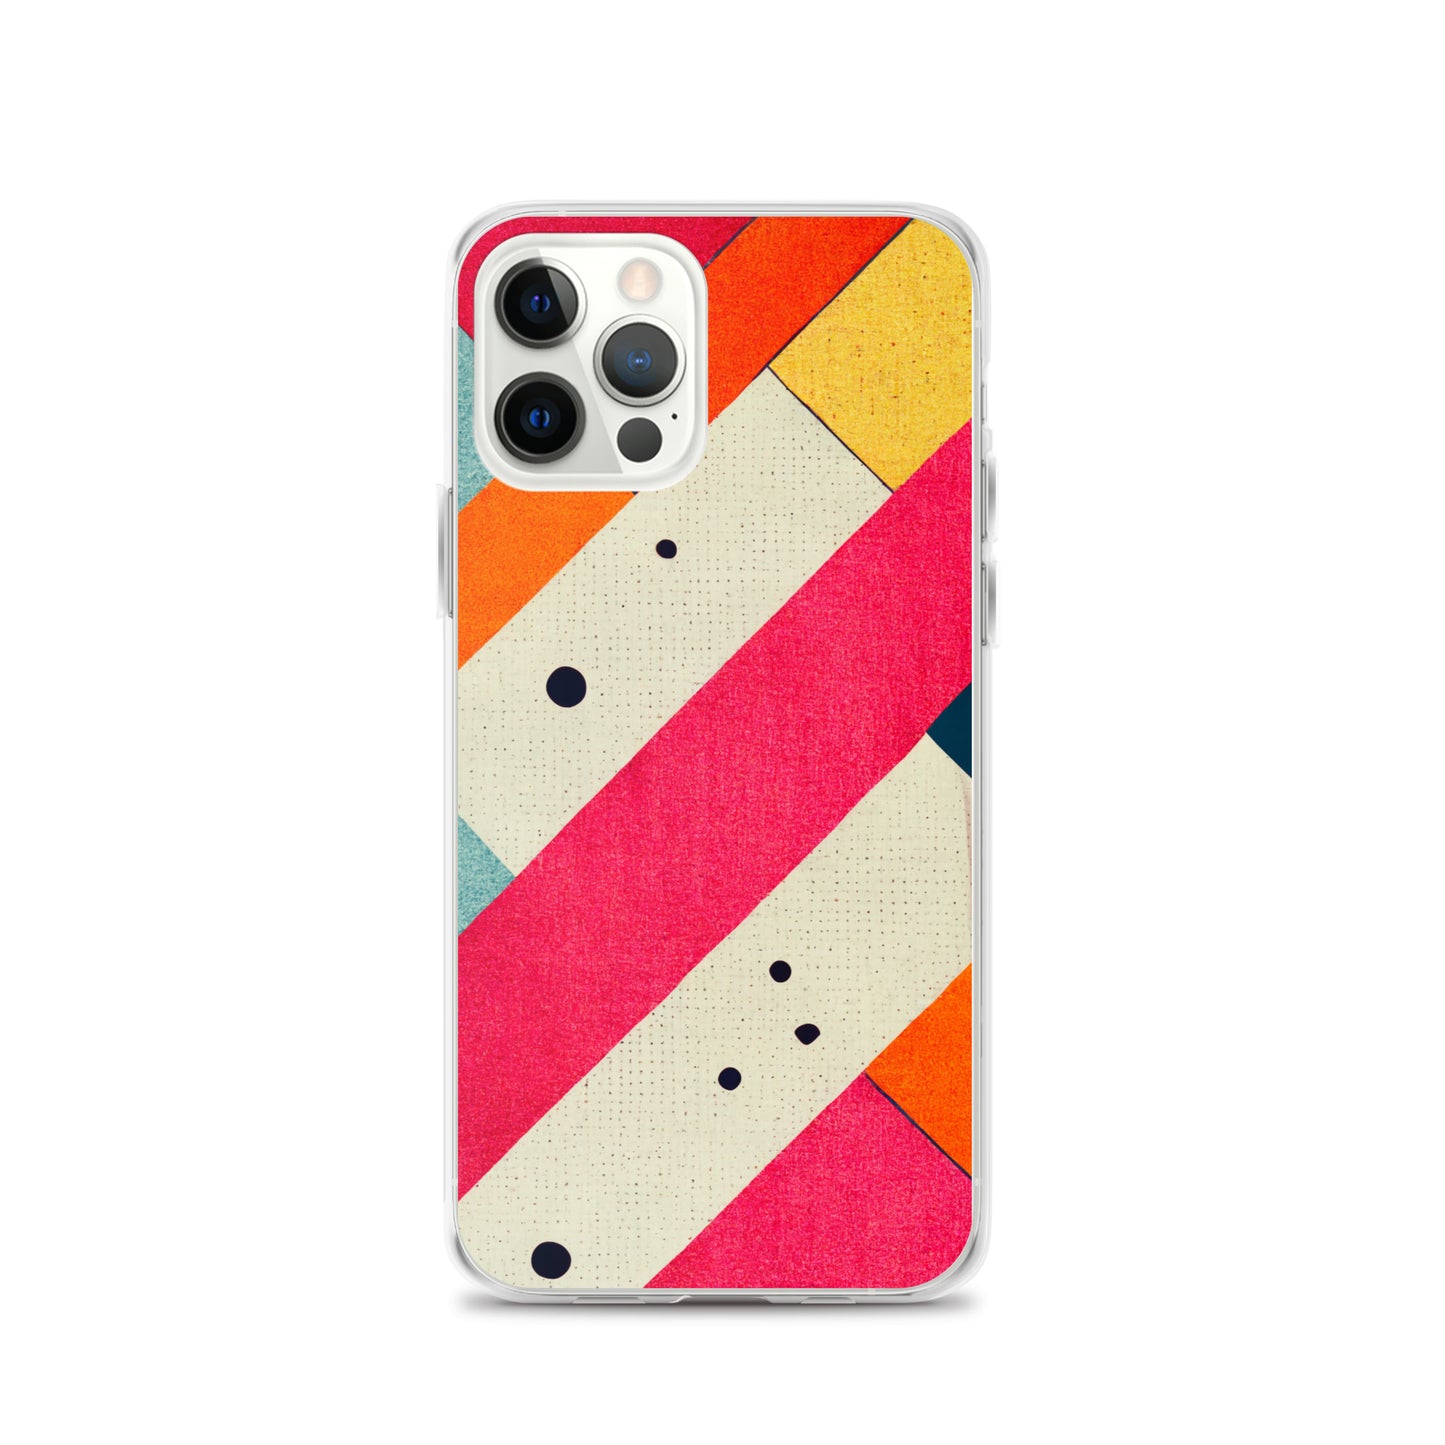 iPhone Case - Bold Patterns #4